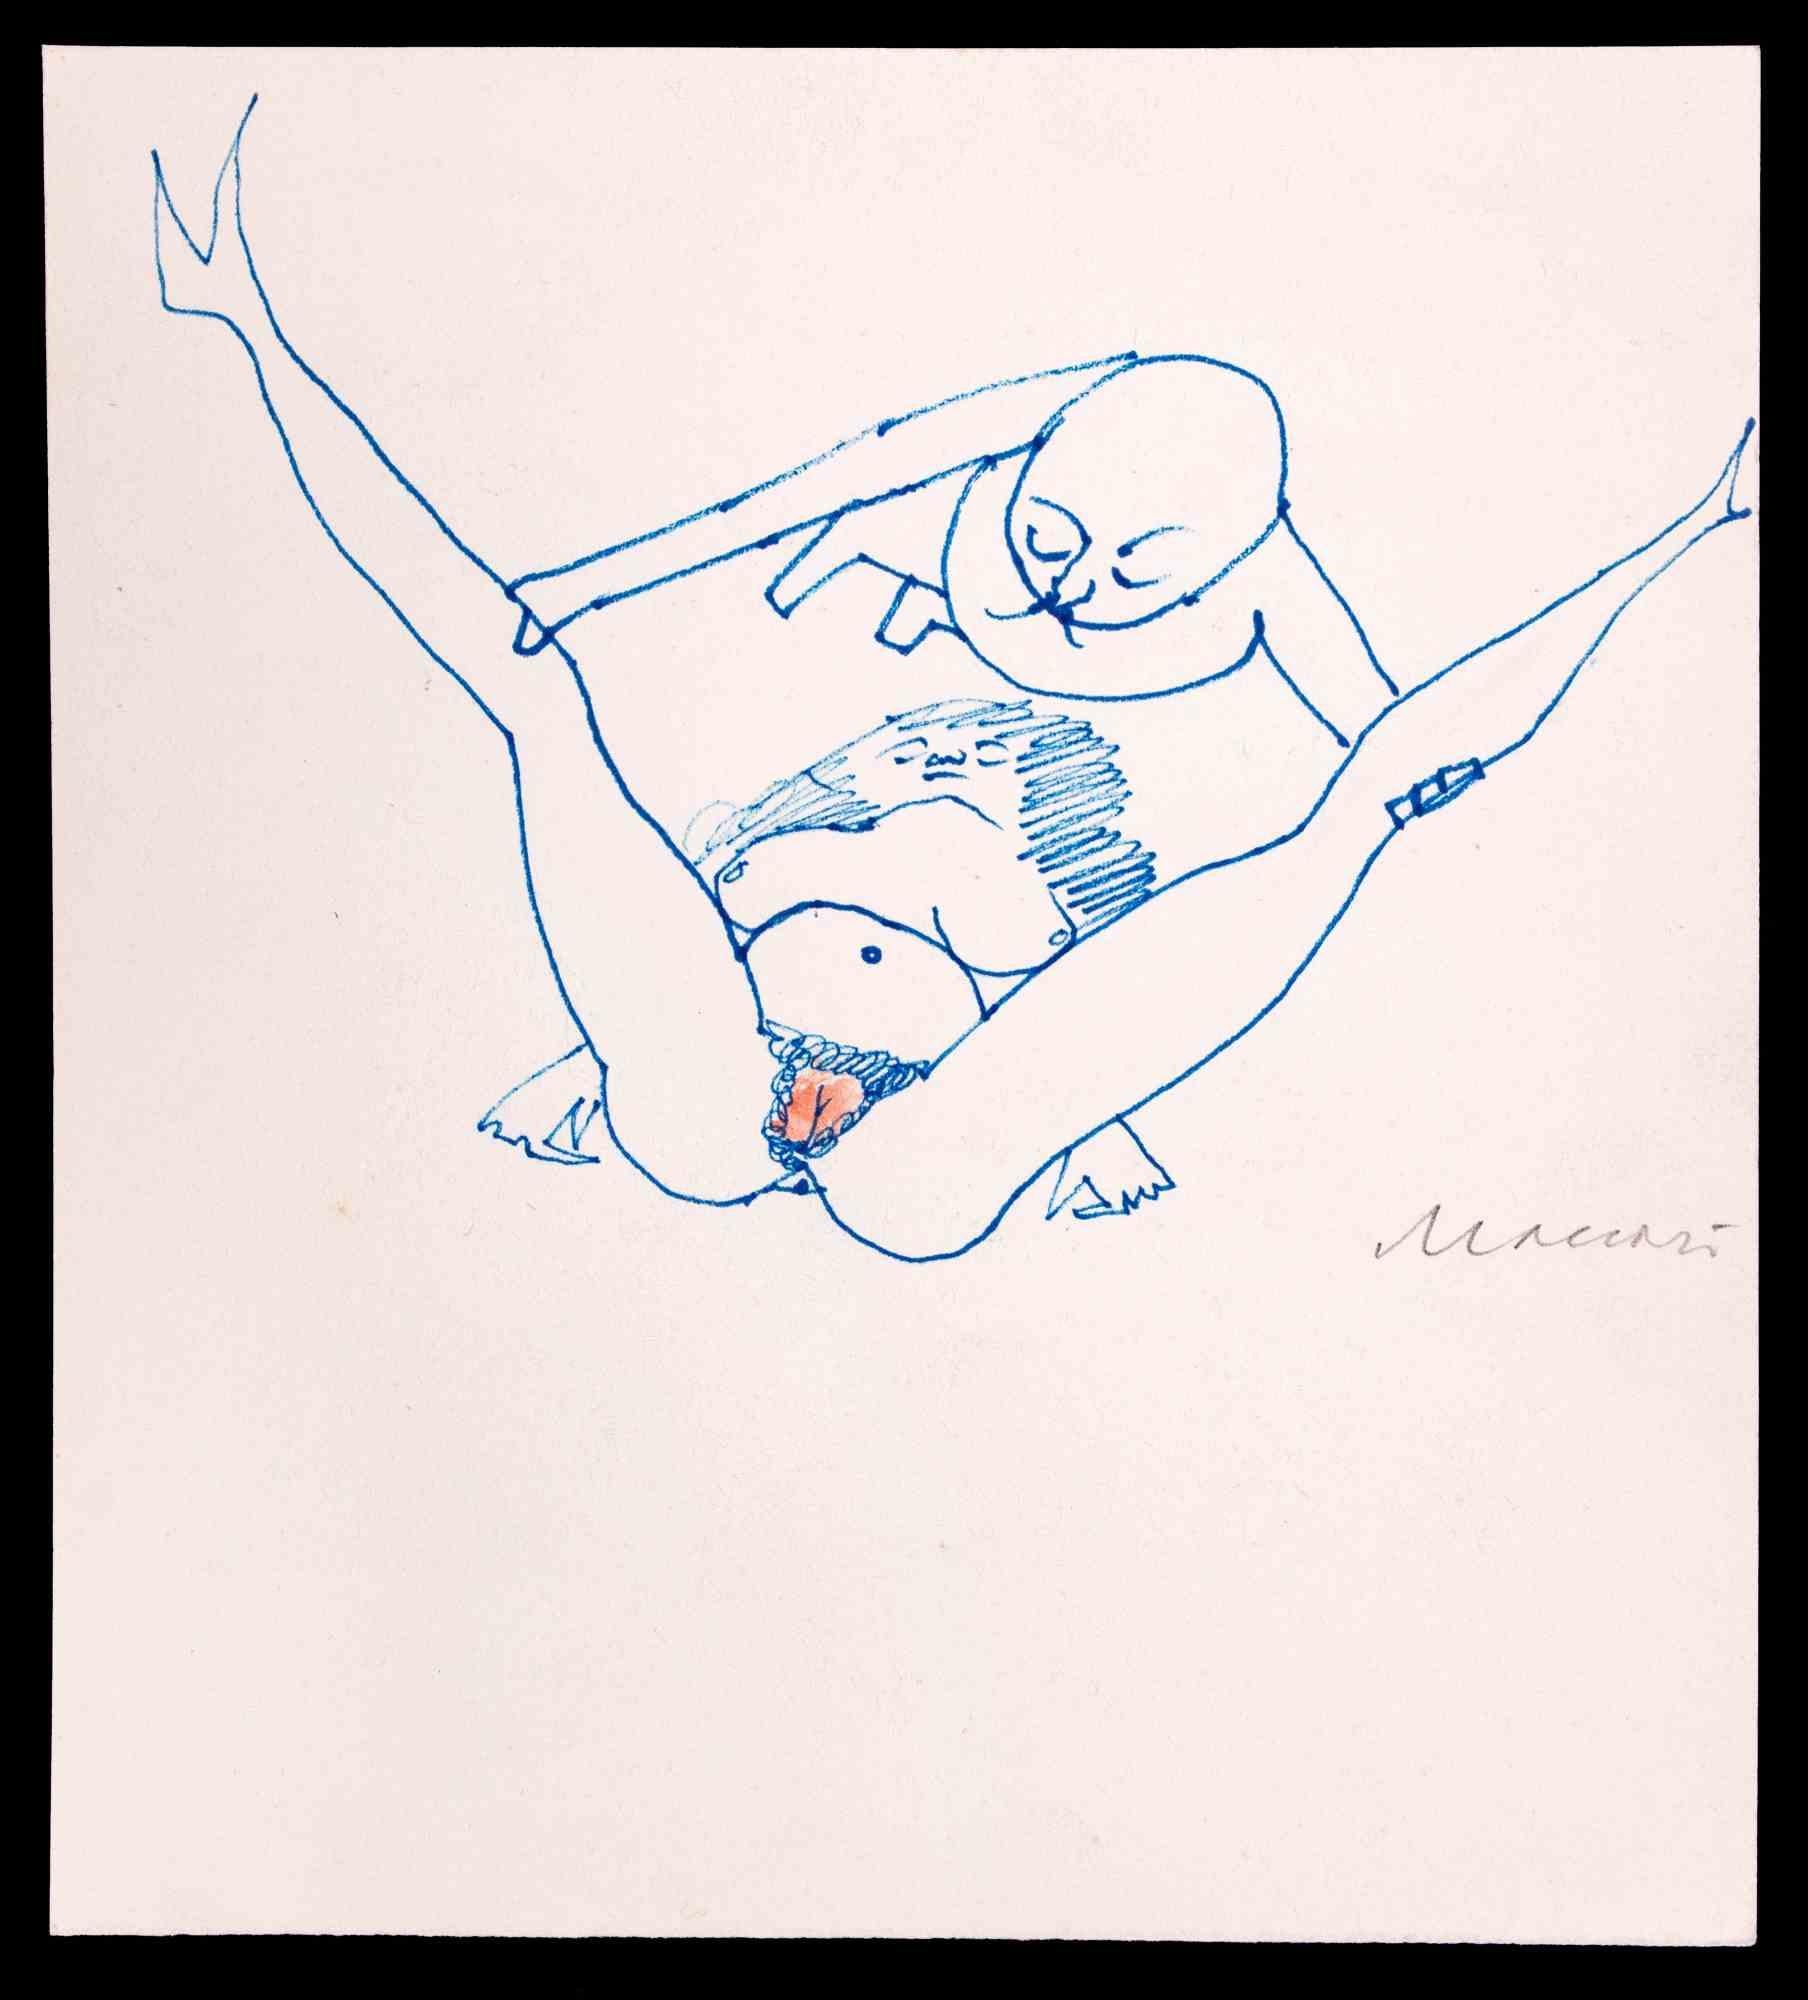 Erotic Scene is a china ink Drawing realized by Mino Maccari in 1970.

Hand-signed on the lower margin.

Good condition on a cardboard.

Mino Maccari (Siena, 1924-Rome, June 16, 1989) was an Italian writer, painter, engraver and journalist, winner